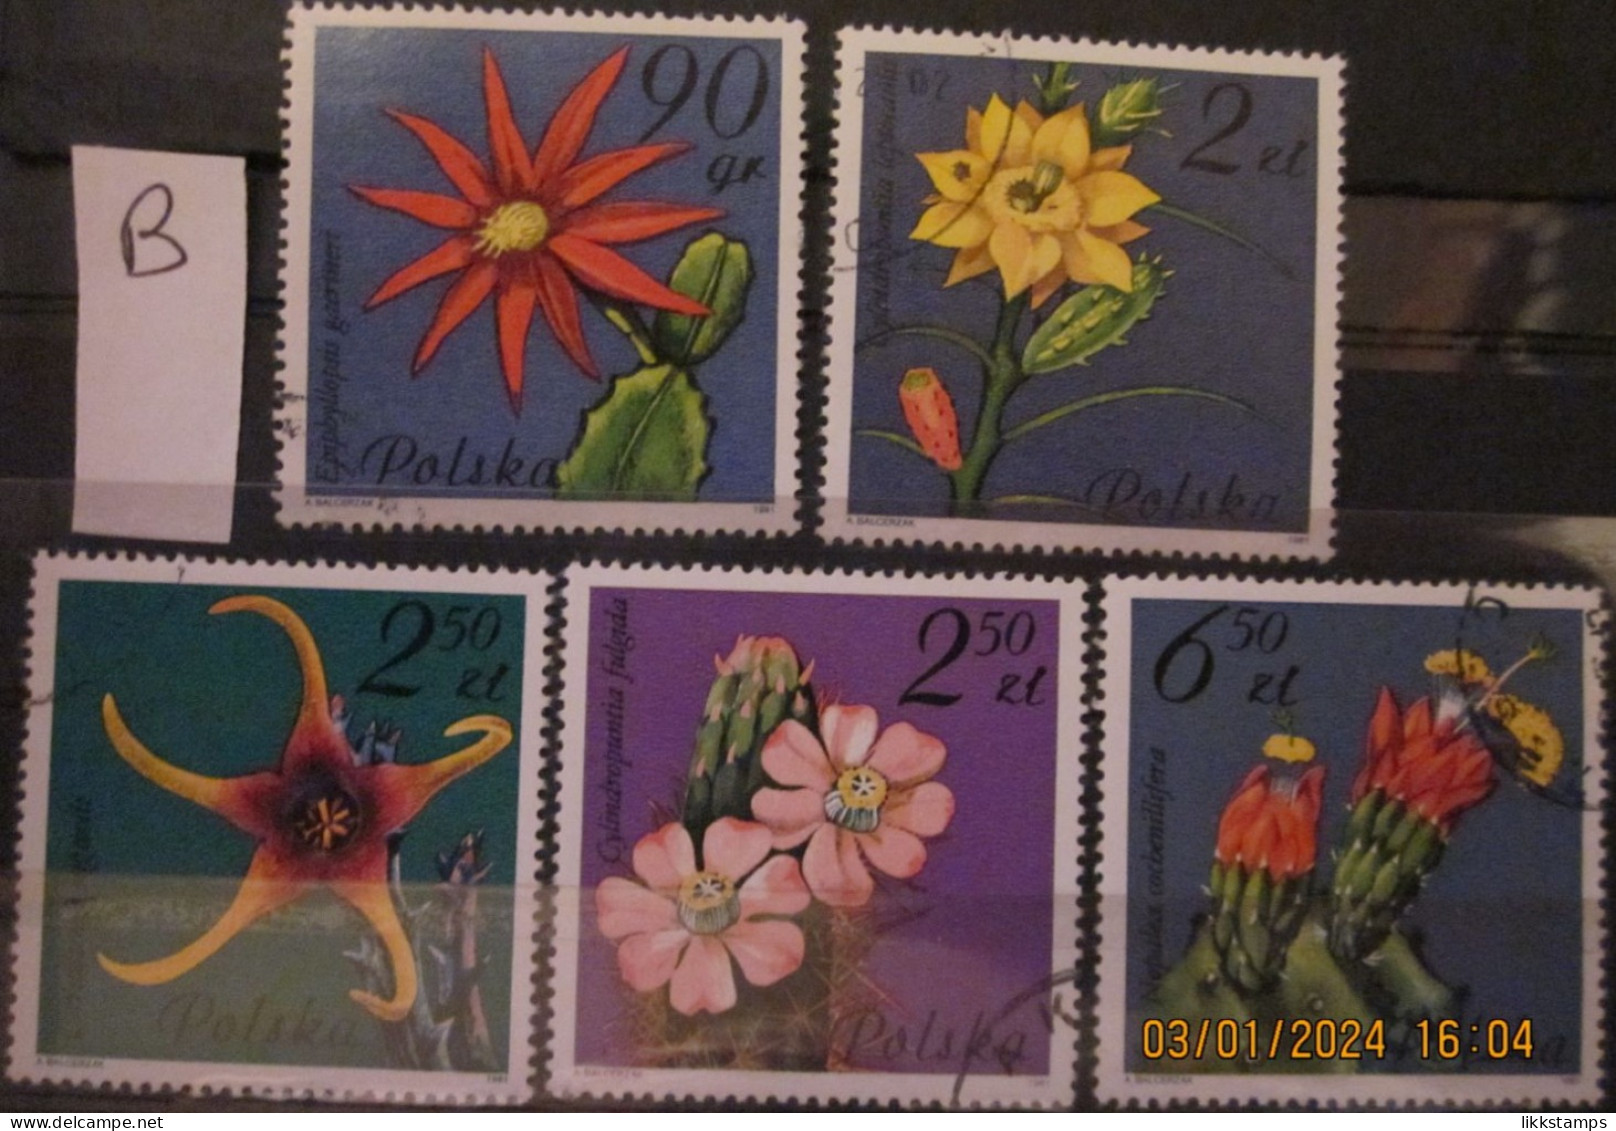 POLAND ~ 1981 ~ S.G. NUMBERS S.G. 2786 + 2788 - 2791. ~ 'LOT B' ~ SUCCULENT PLANTS ~ VFU #03525 - Used Stamps